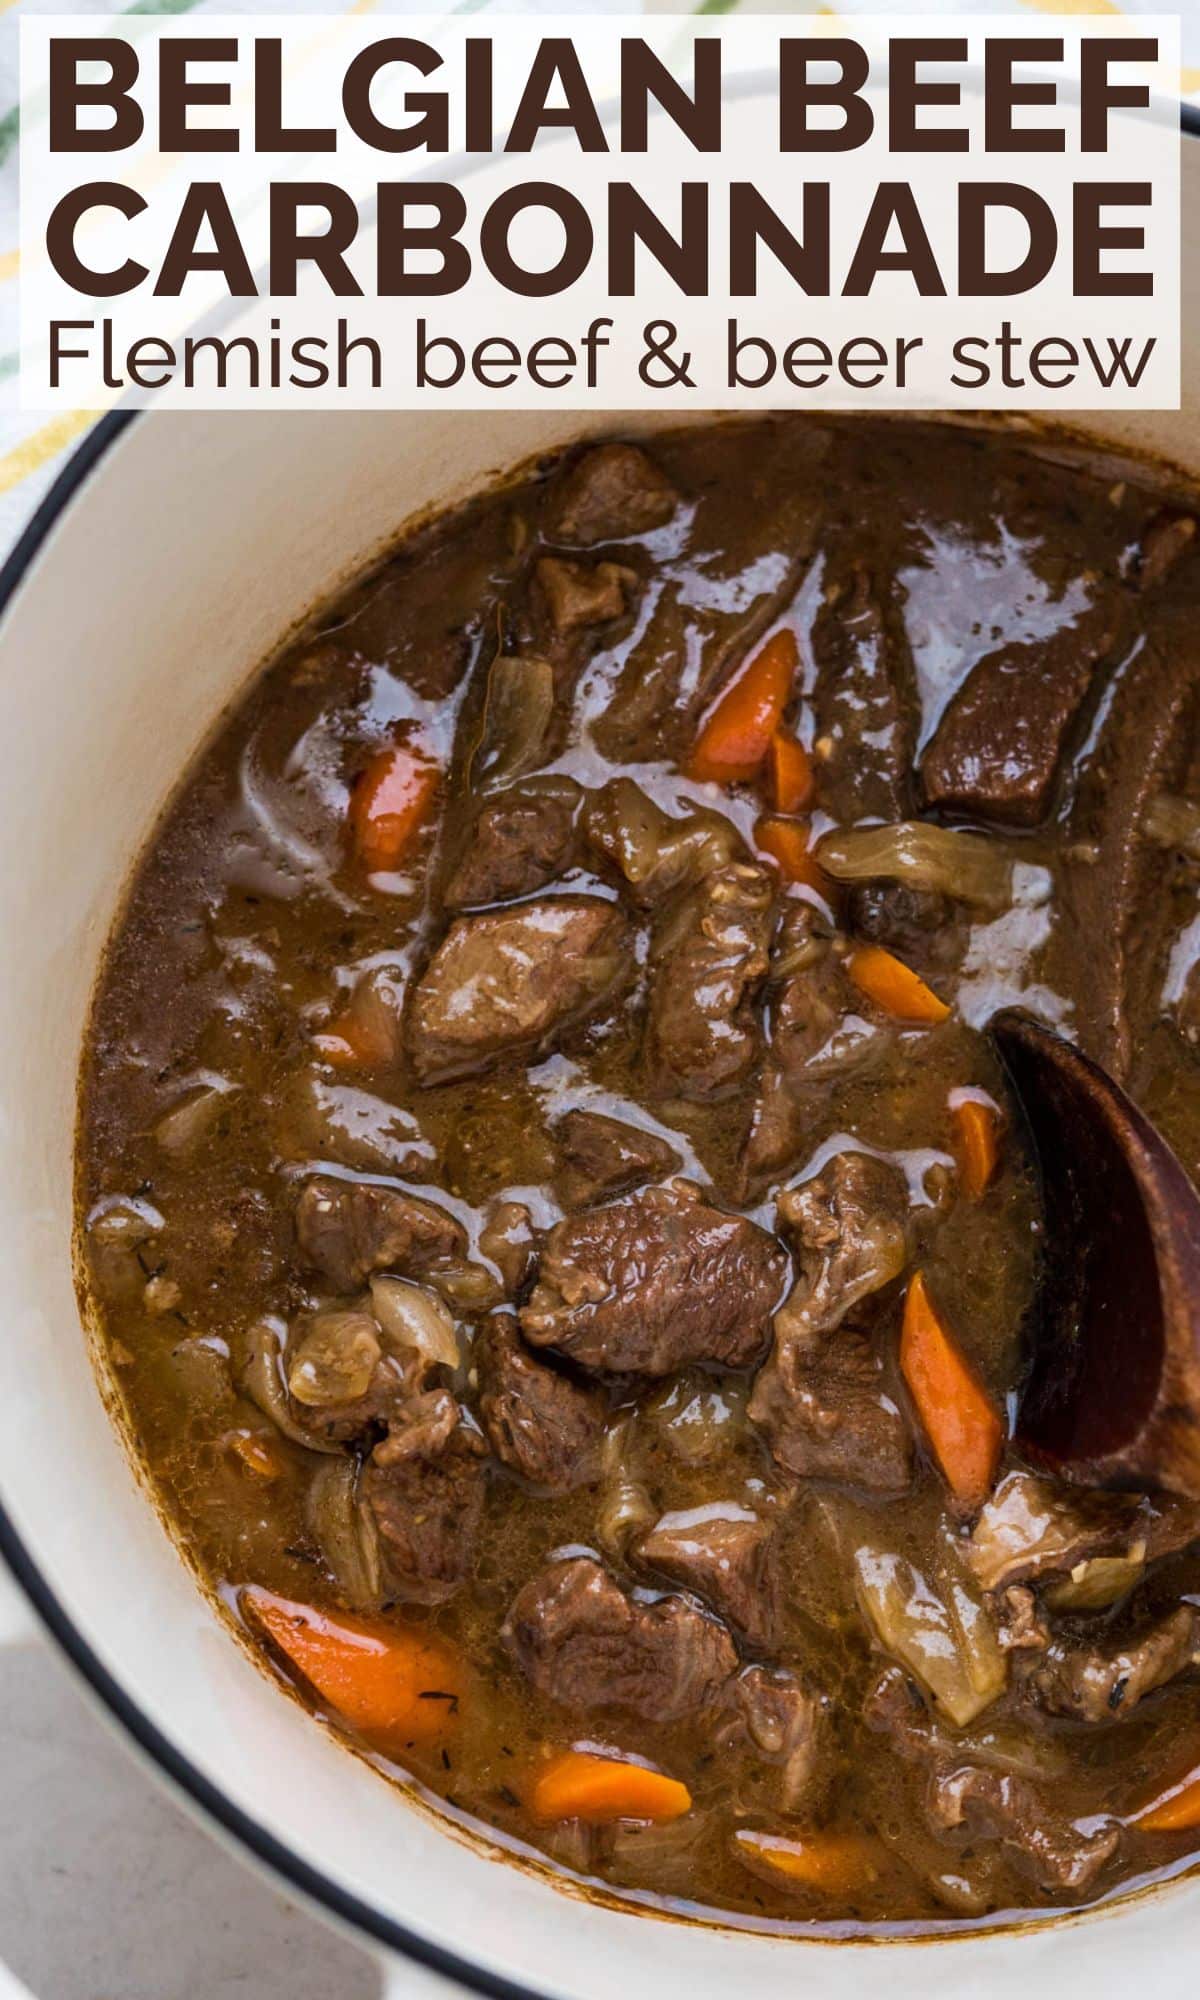 a pin of the belgian beef carbonnade to save on Pinterest.